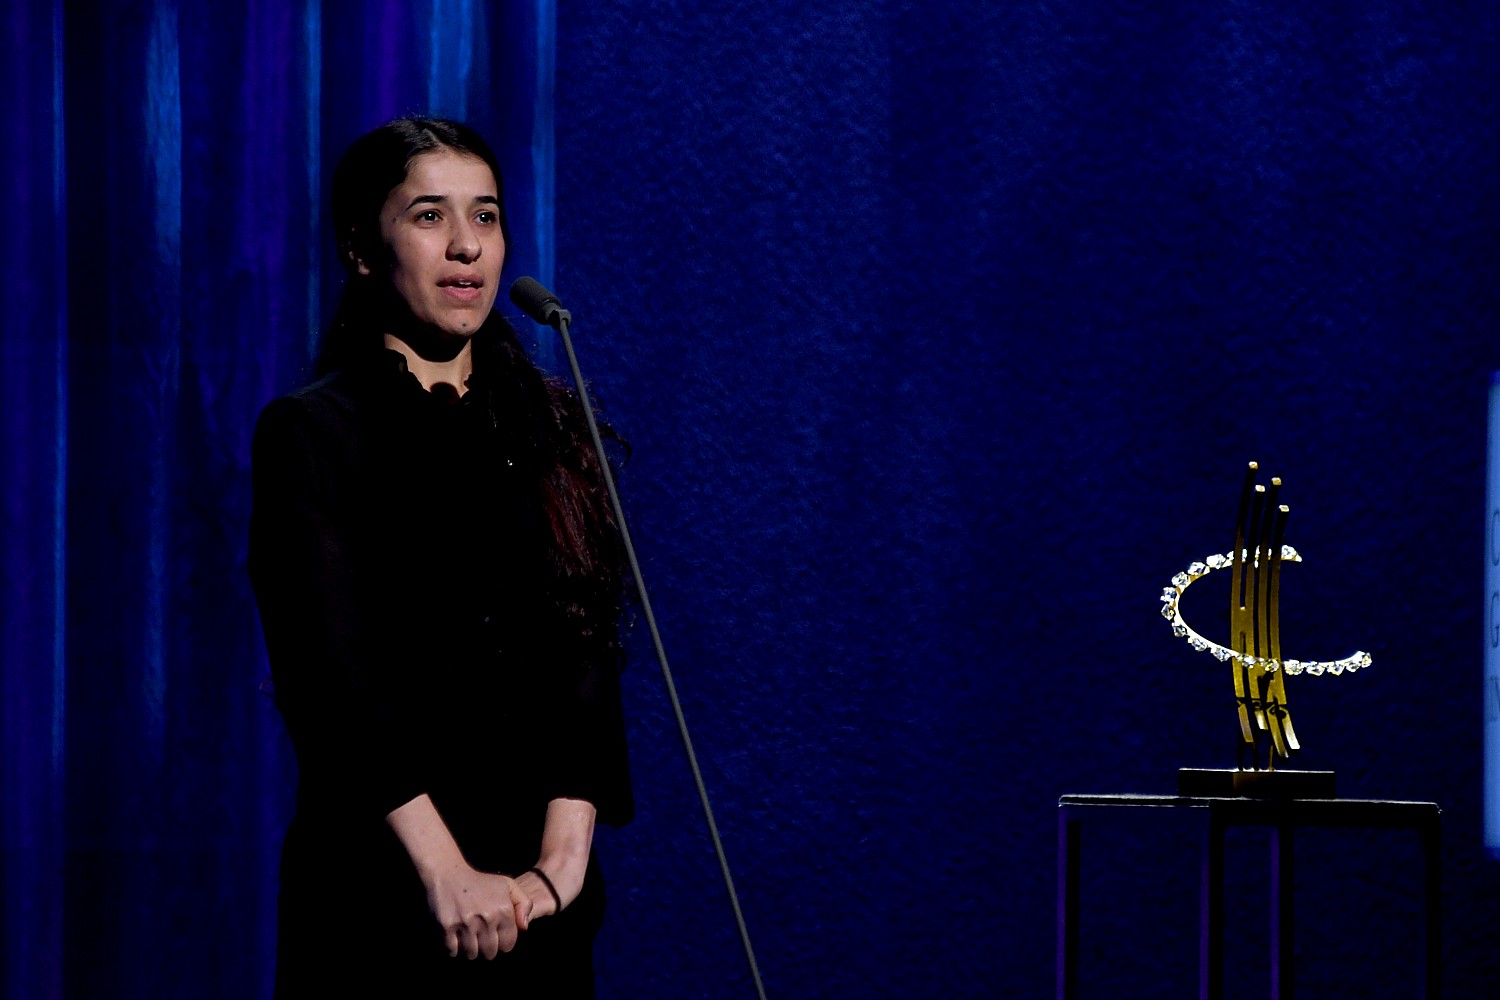 Nadia Murad, a survivor of ISIS terror, has dedicated herself to rescue the thousands of women and girls who have been trafficked in situations of conflict. Honored with a Clinton Global Citizen Award, she also has been named a UN Goodwill Ambassador. © 2016 Karen Rubin/news-photos-features.com